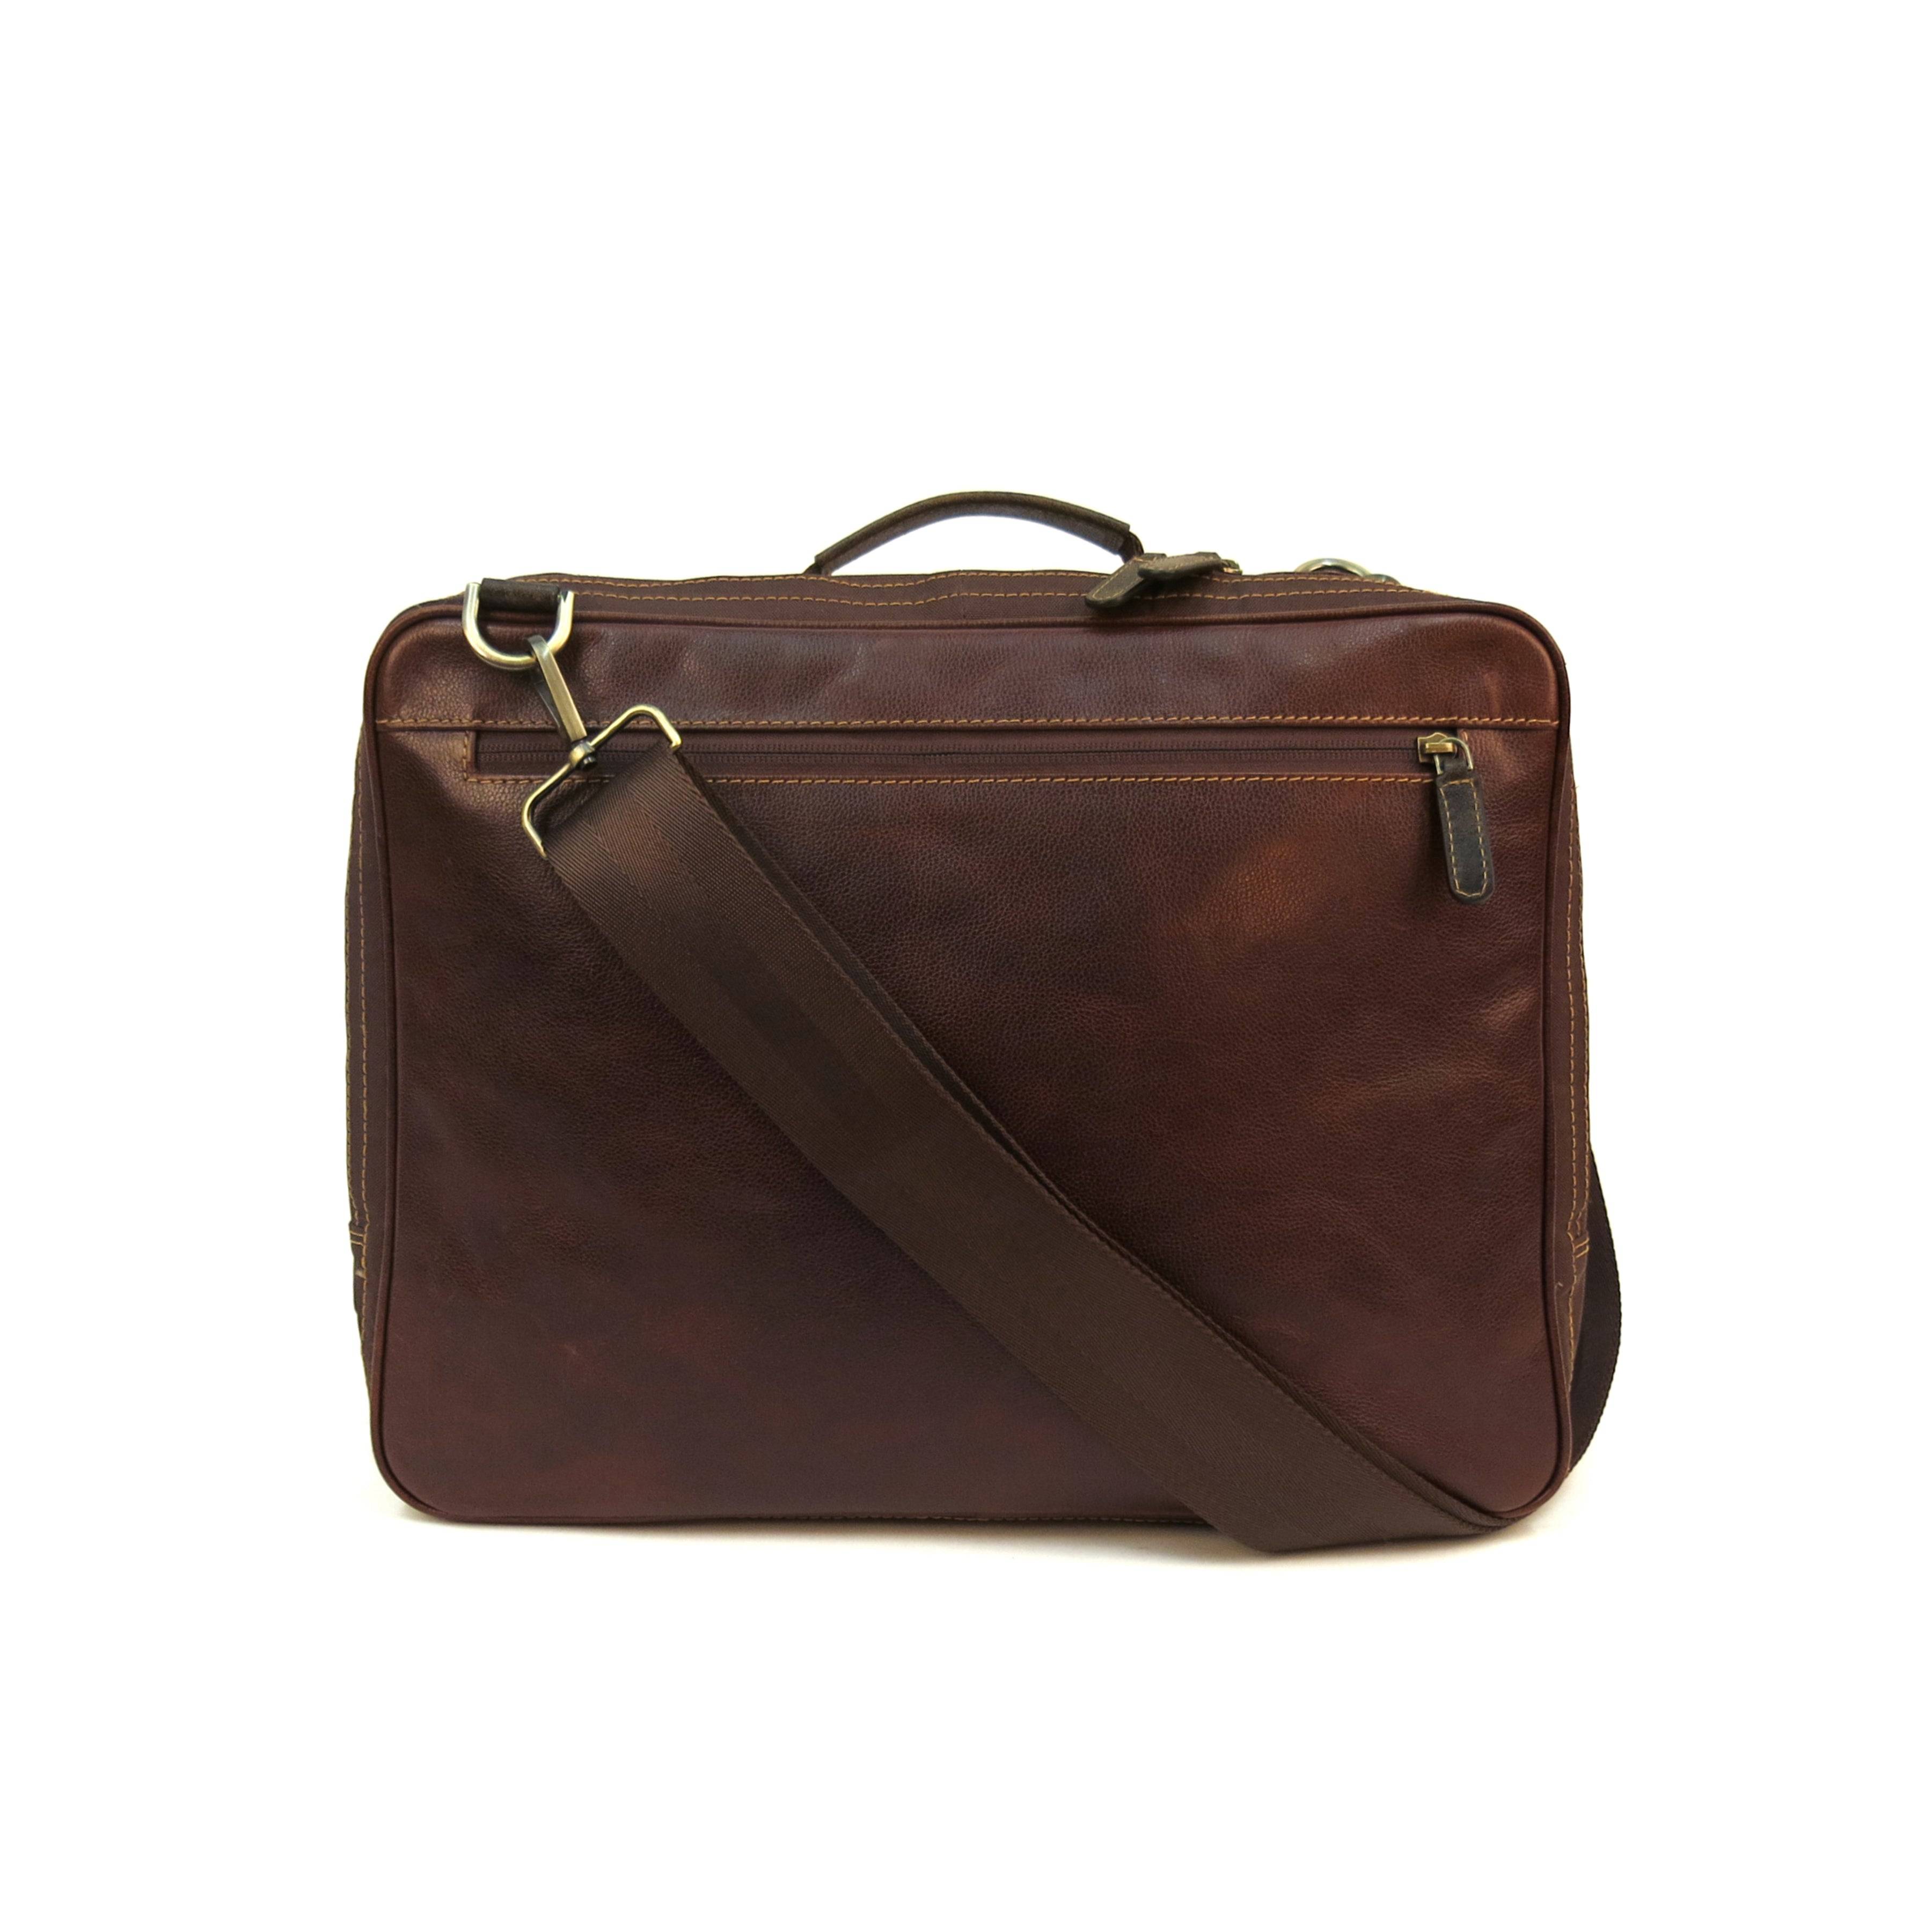 a brown leather briefcase on a white background